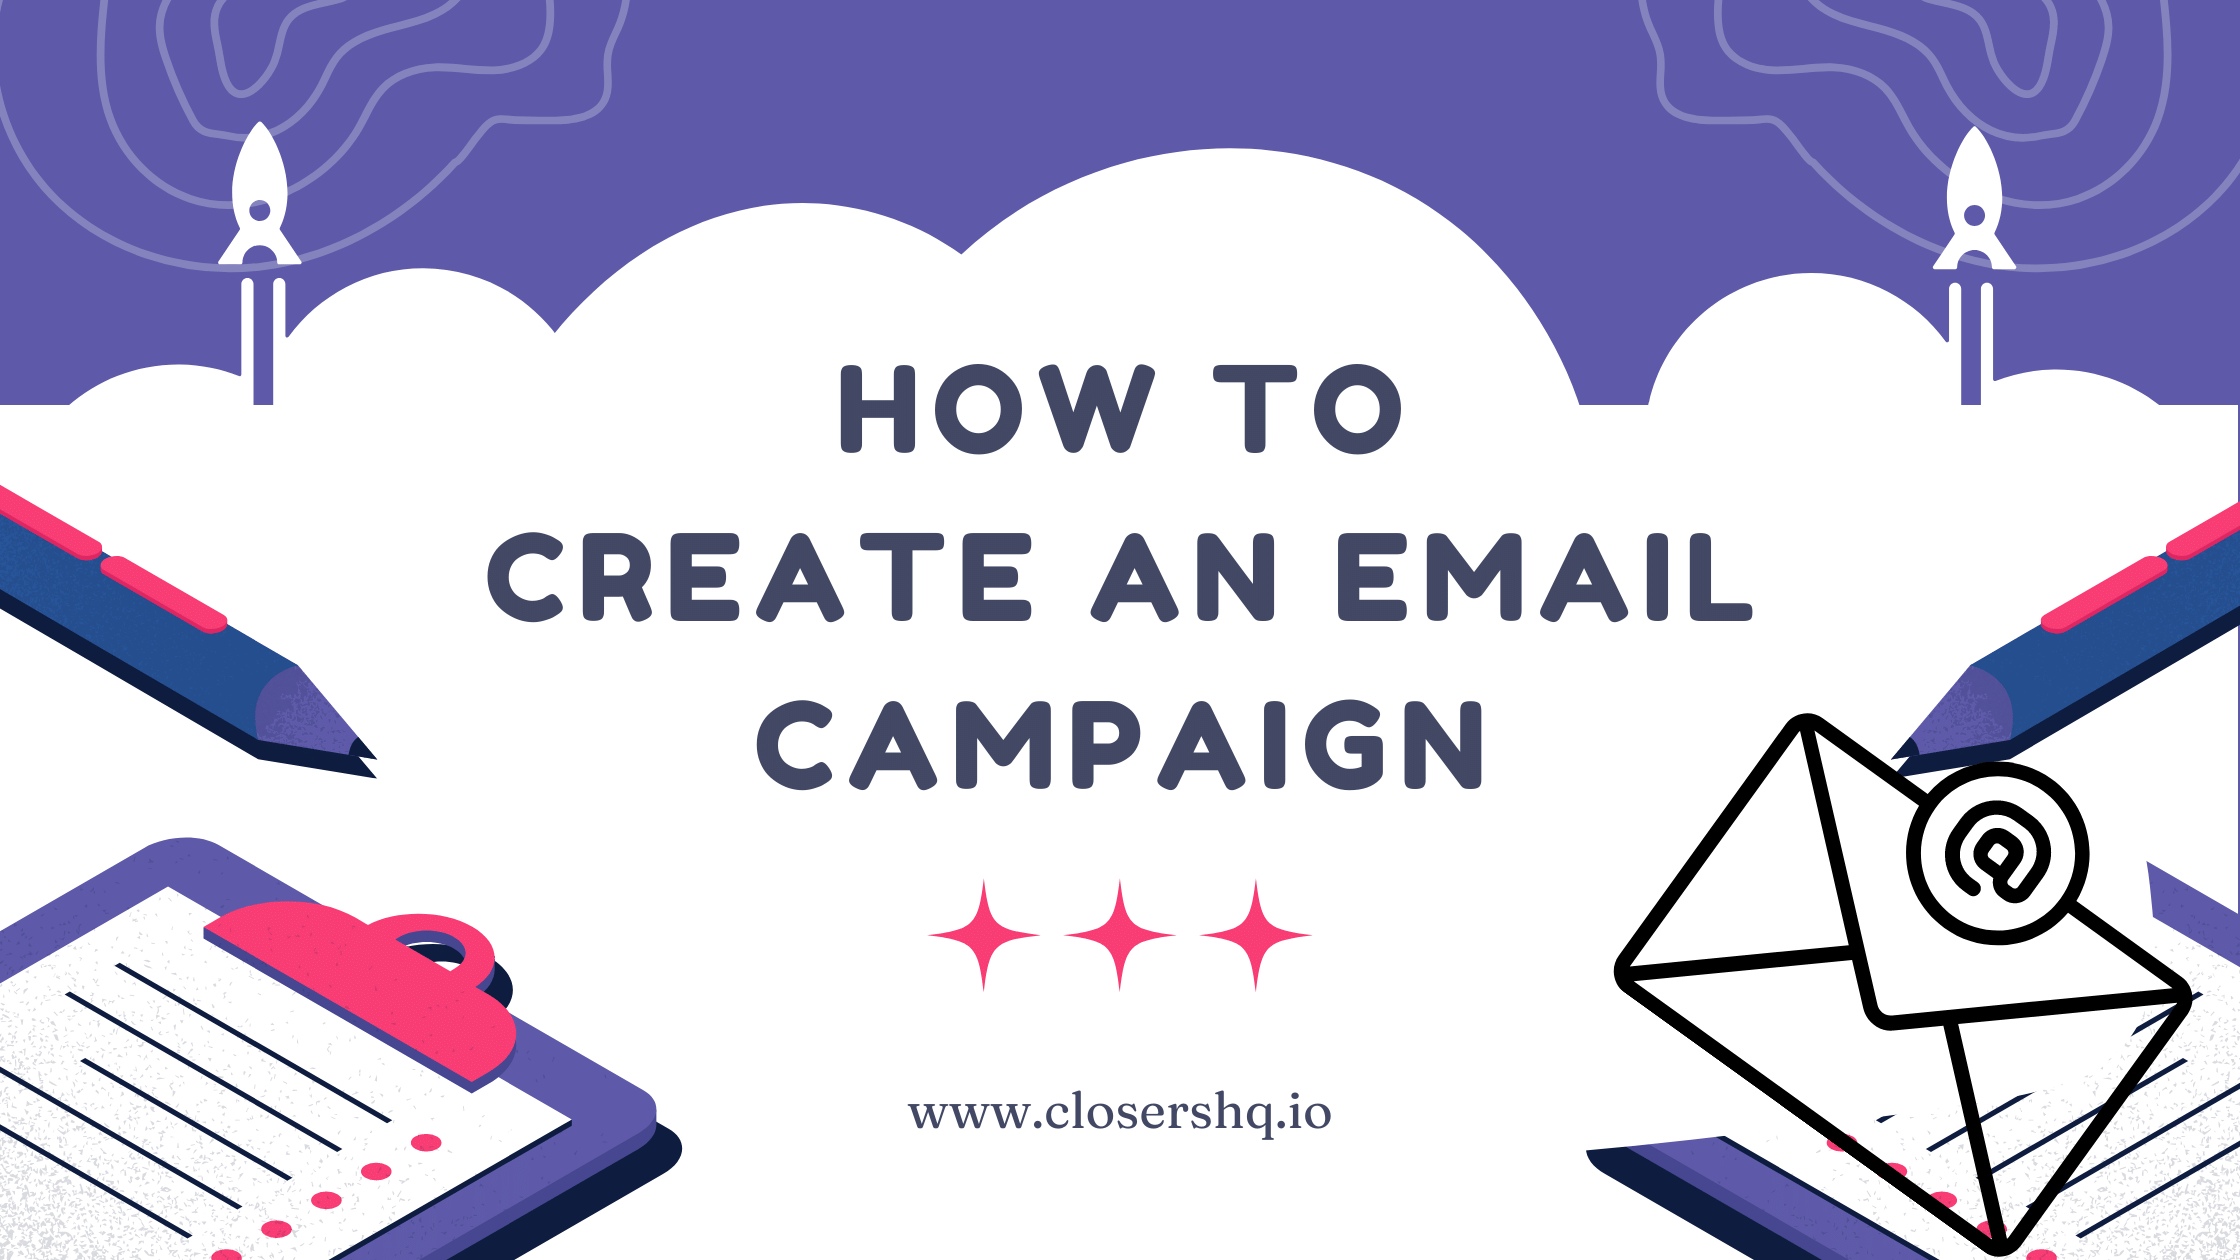 What is Email Marketing, How does it Differ from Cold Email and How to Make the Most of It?